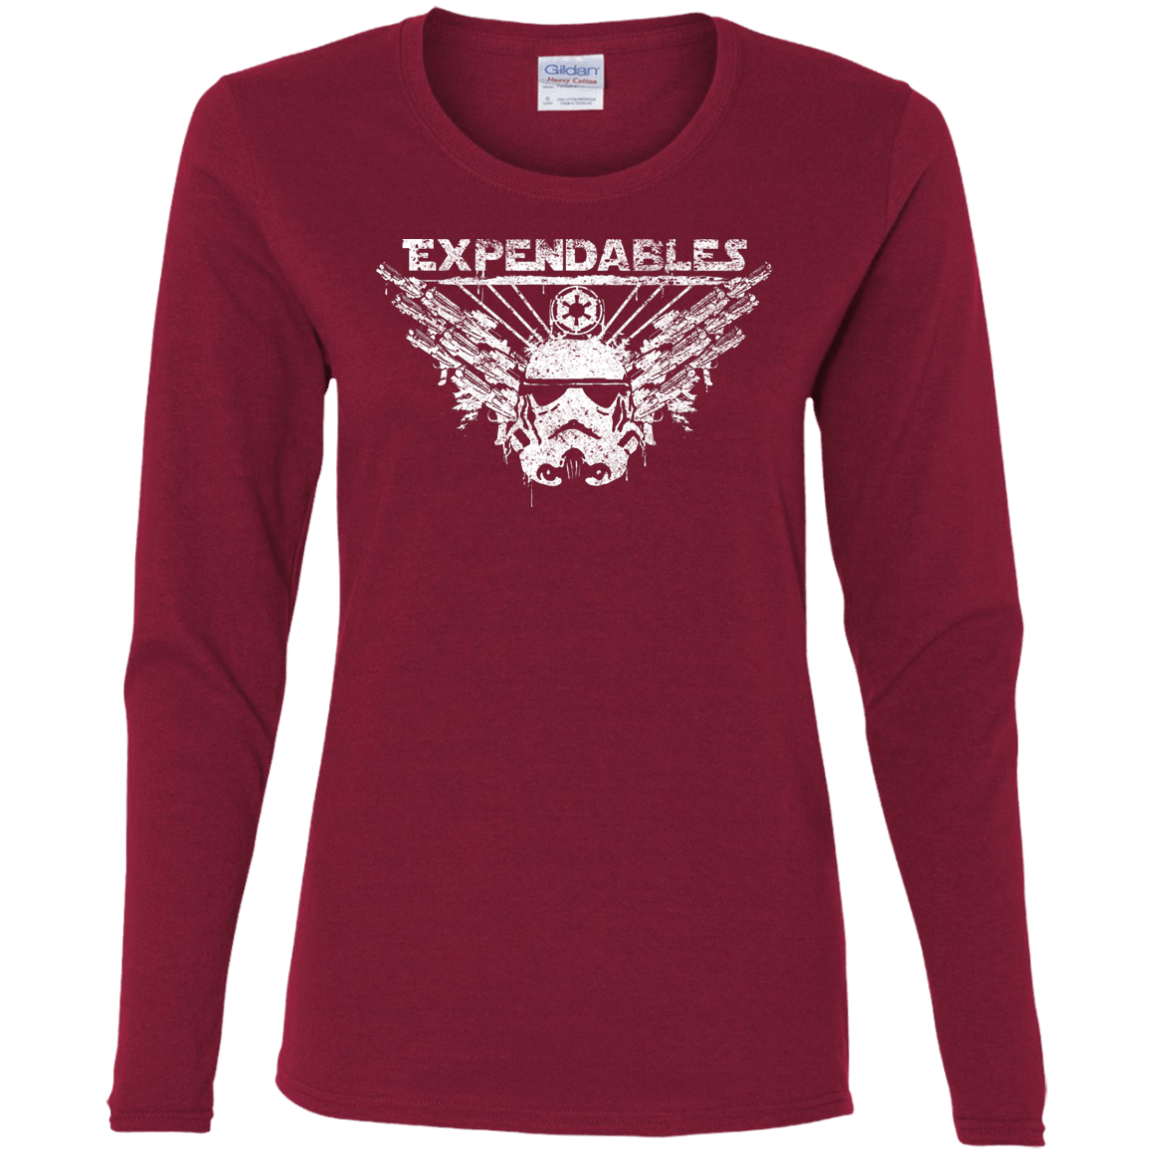 T-Shirts Cardinal / S Expendable Troopers Women's Long Sleeve T-Shirt